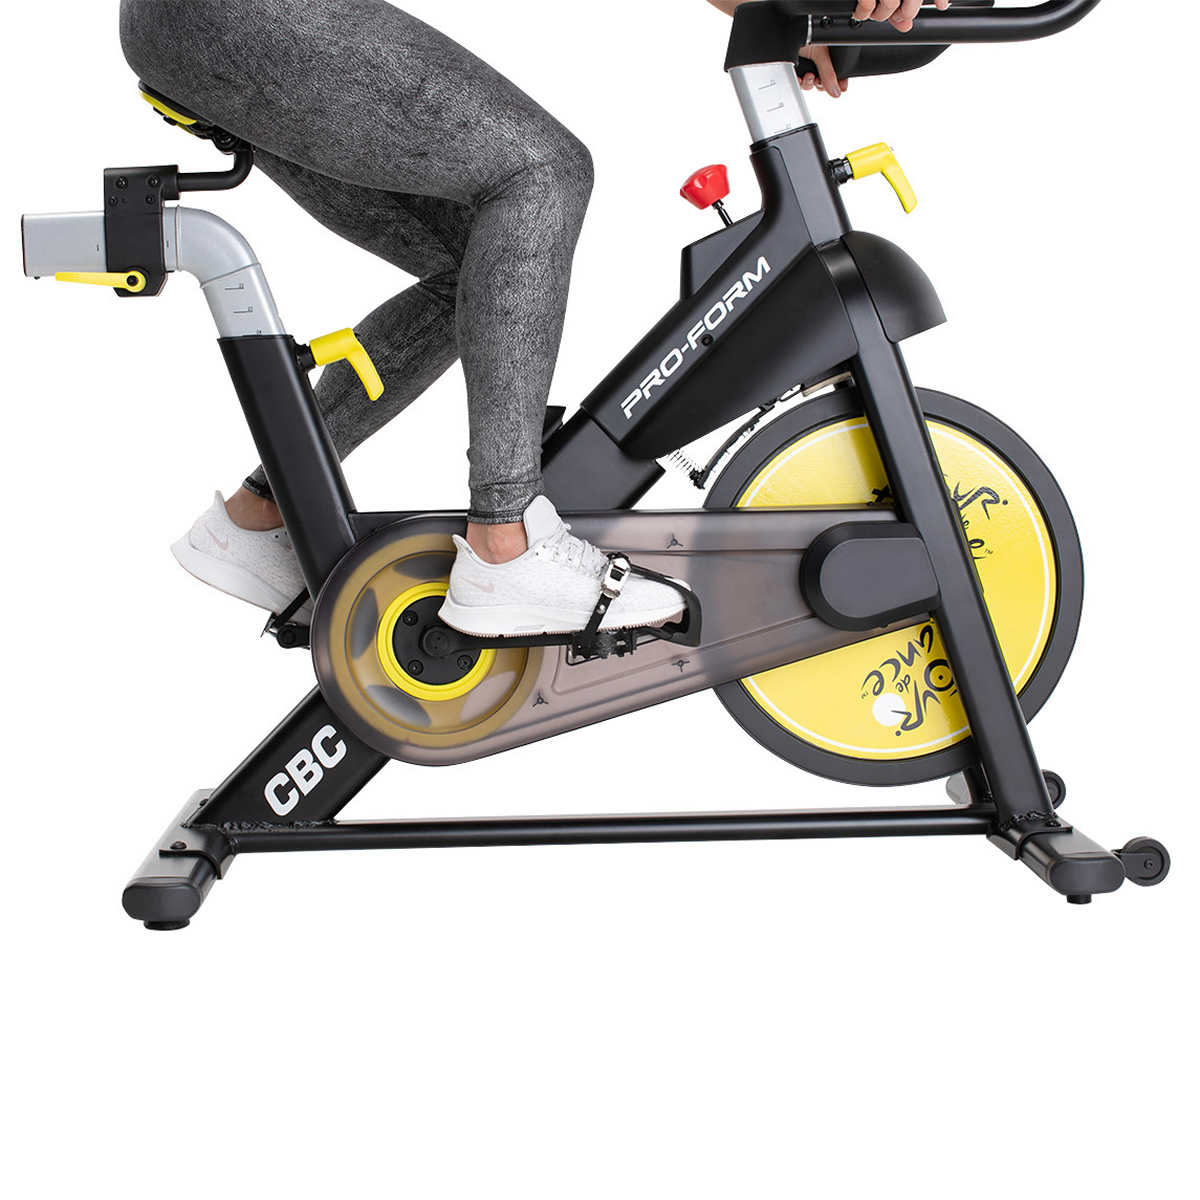 Select Costco Stores: Pro-form Tour de France exercise bike w/1-year Ifit membership $199!